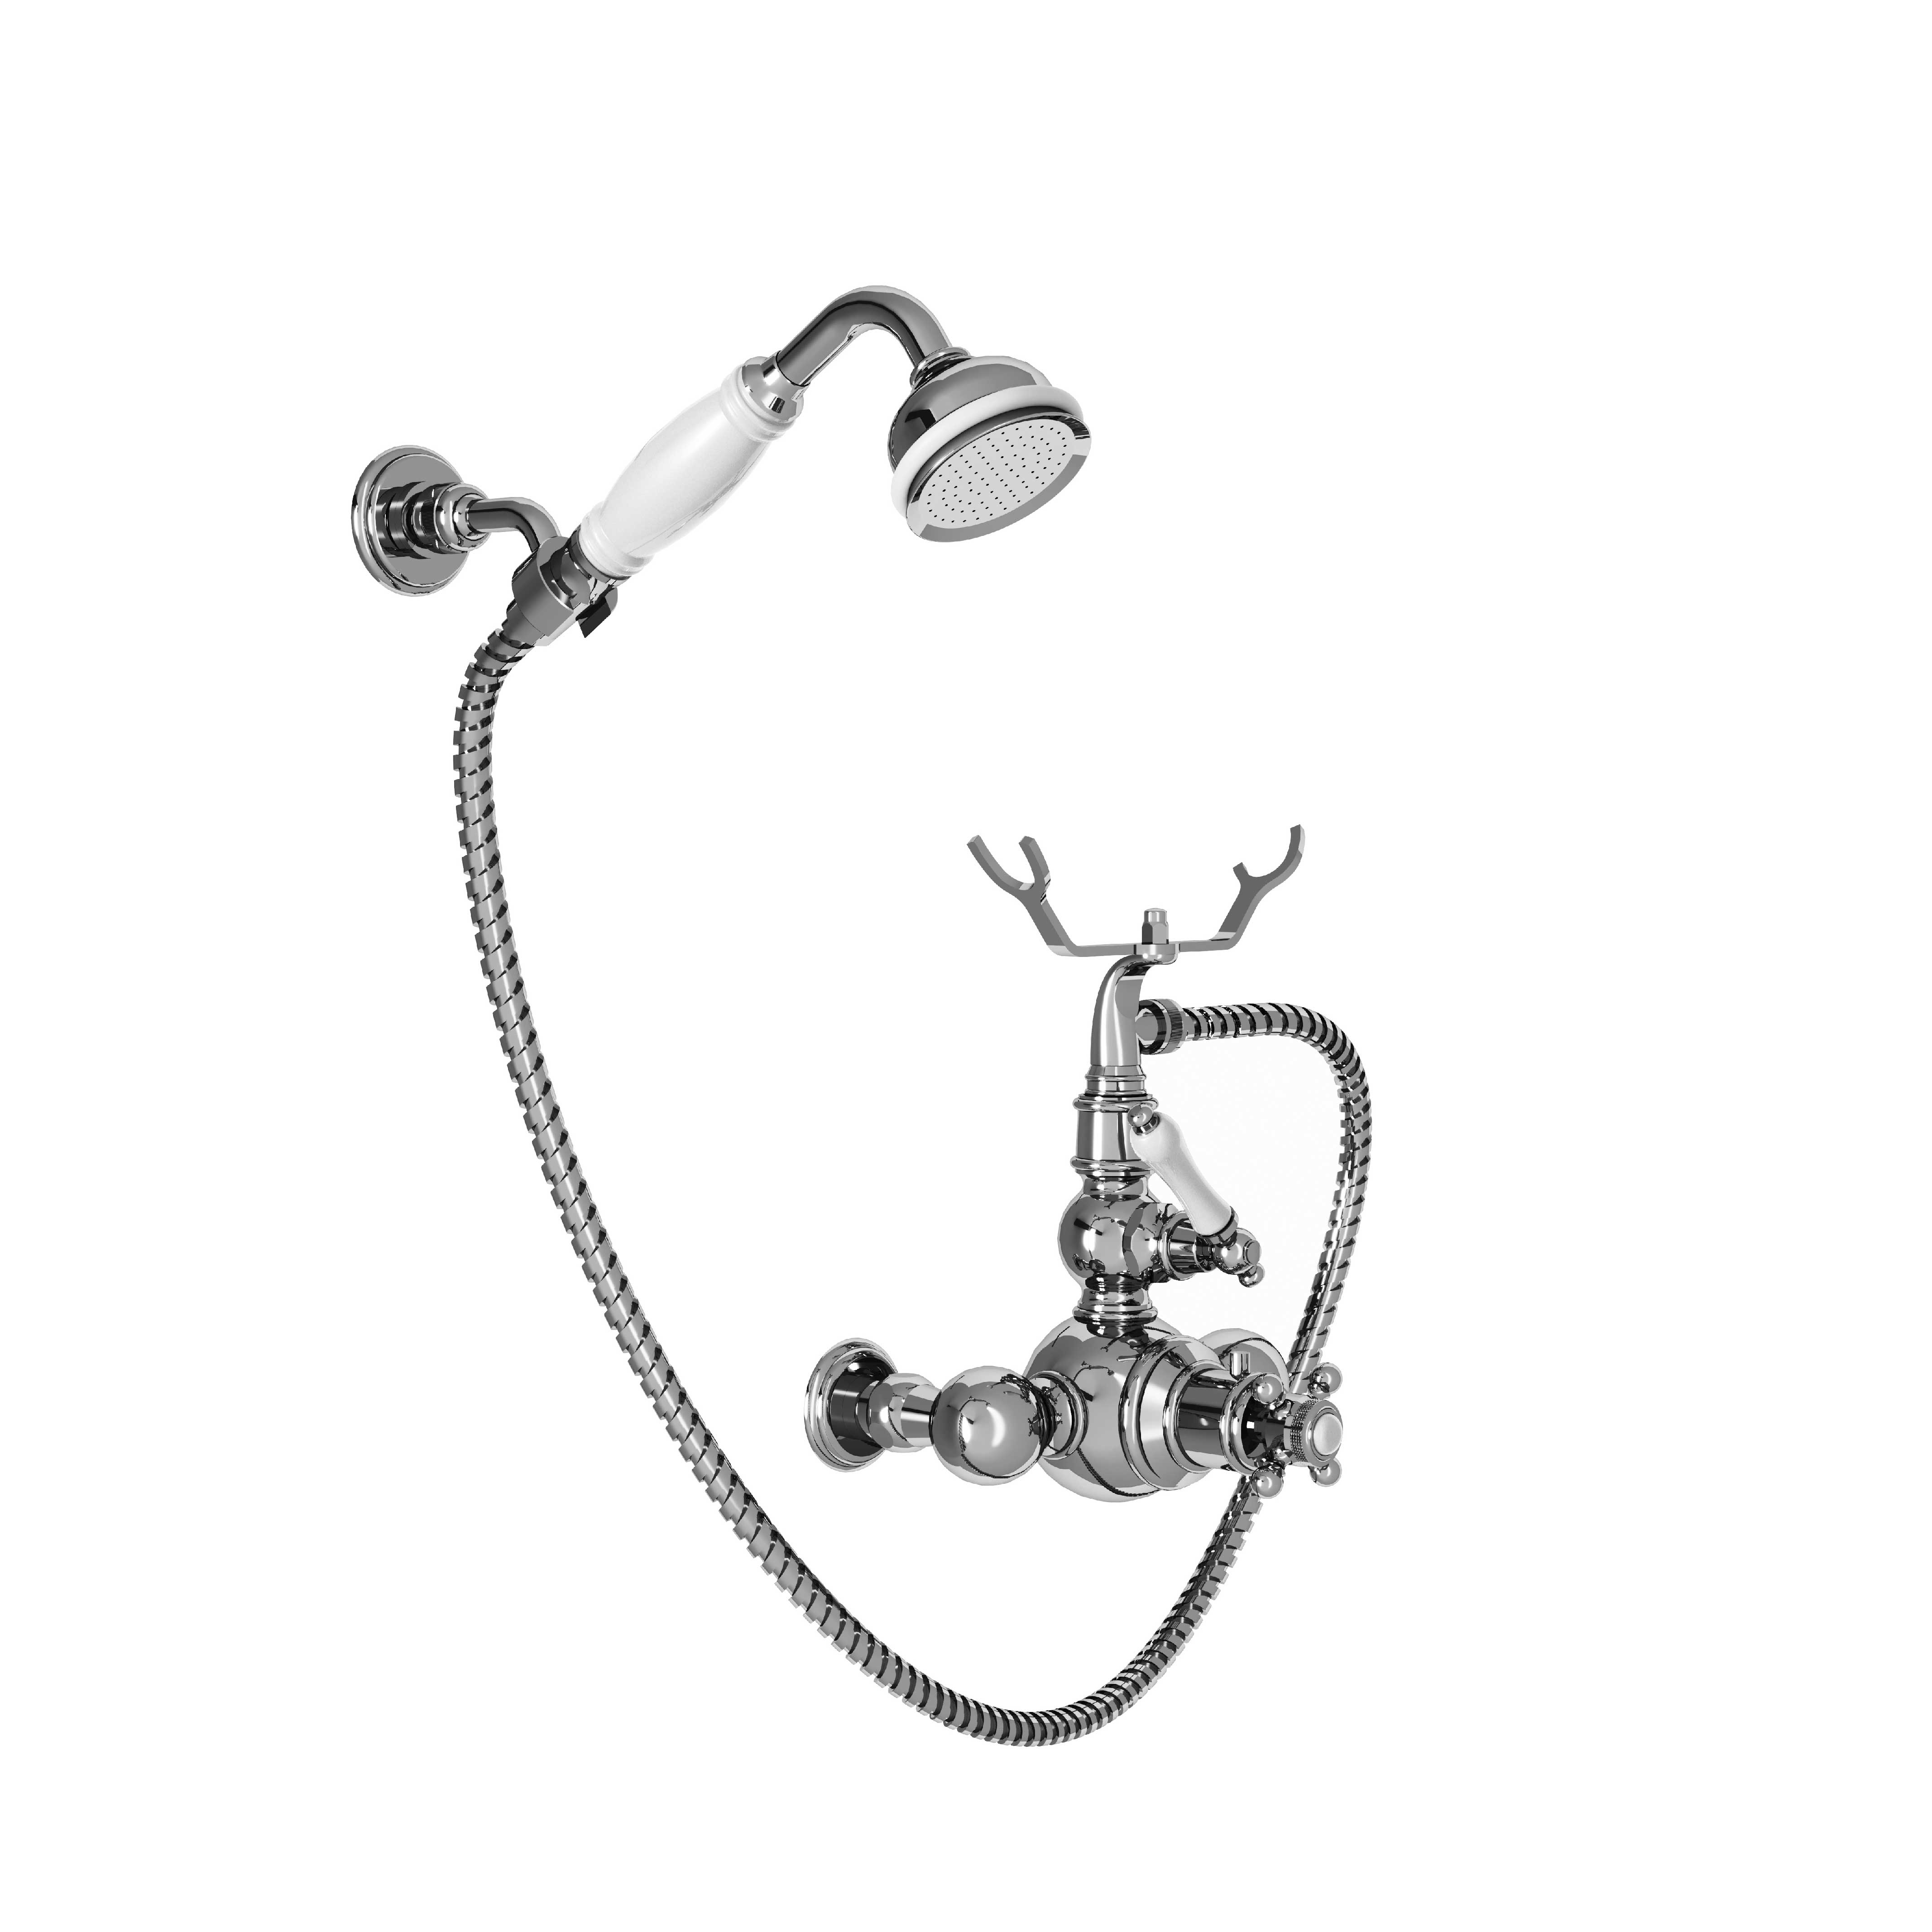 M20-2201T Thermostatic shower mixer with hook